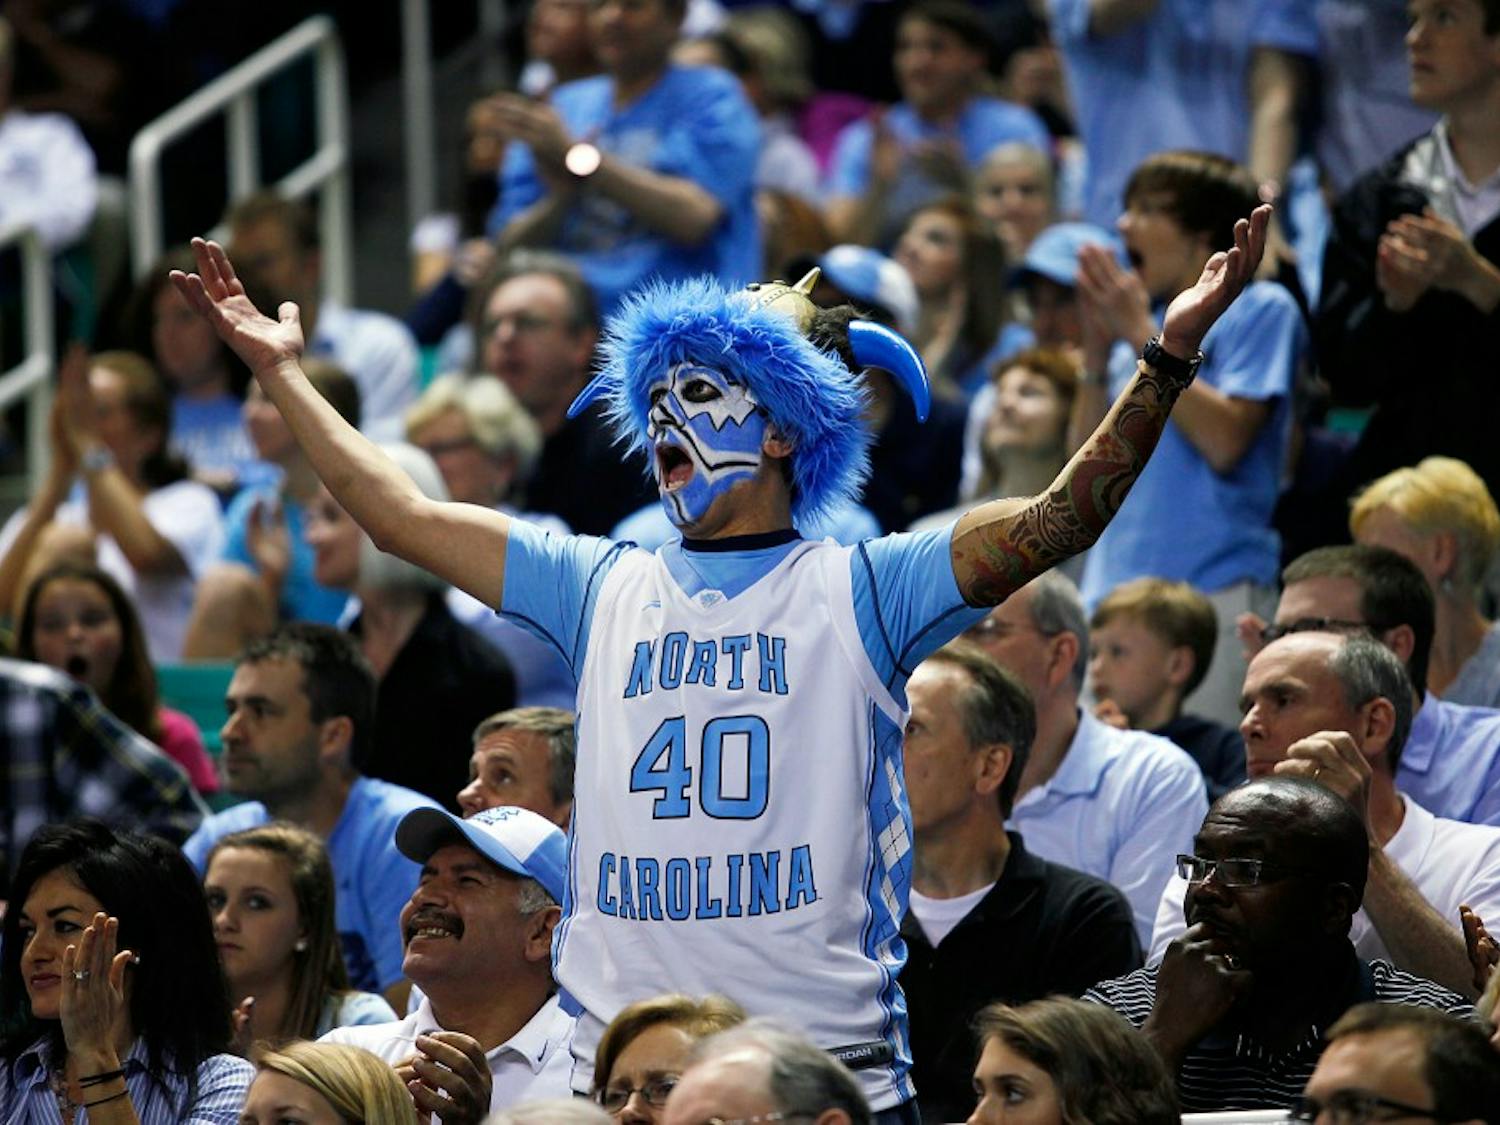 	The North Carolina Tar Heels defeated the Creighton Bluejays 87-73 in the third round of the NCAA Tournament at the Greensboro Coliseum on Sunday, March 18, 2012, and will advance to the Sweet 16 in St. Louis. 